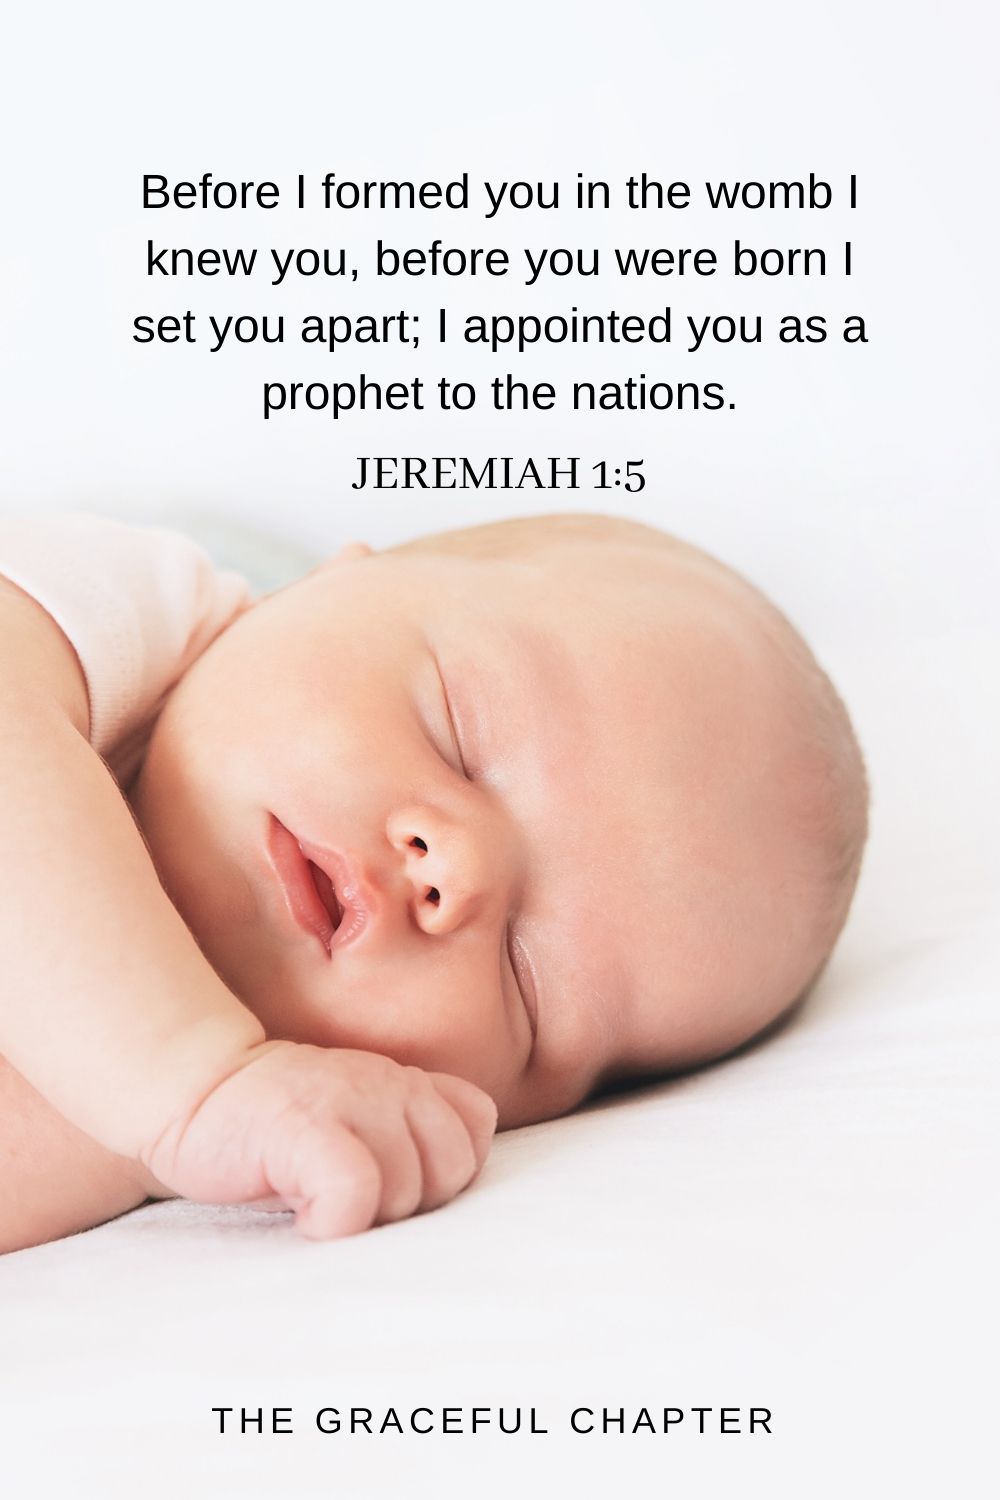 Before I formed you in the womb I knew you, before you were born I set you apart; I appointed you as a prophet to the nations. Jeremiah 1:5